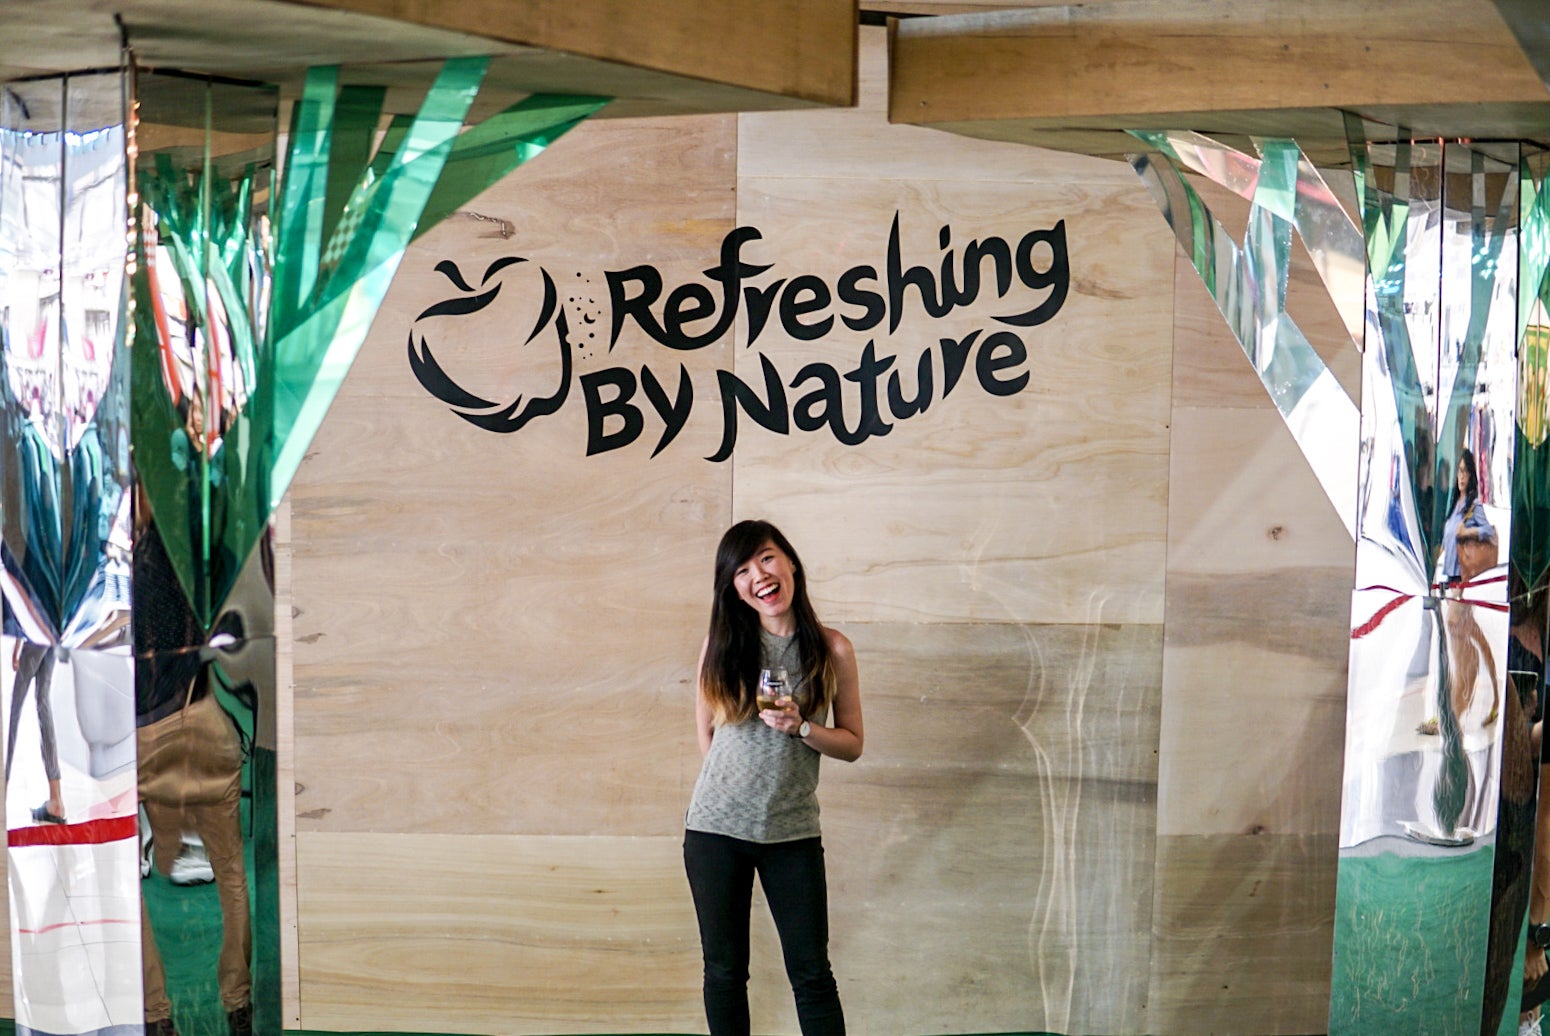 [TEST] See What Happens When Nature Takes Over a Mall at This PJ Event That Offers FREE Cider Sampling! - WORLD OF BUZZ 4